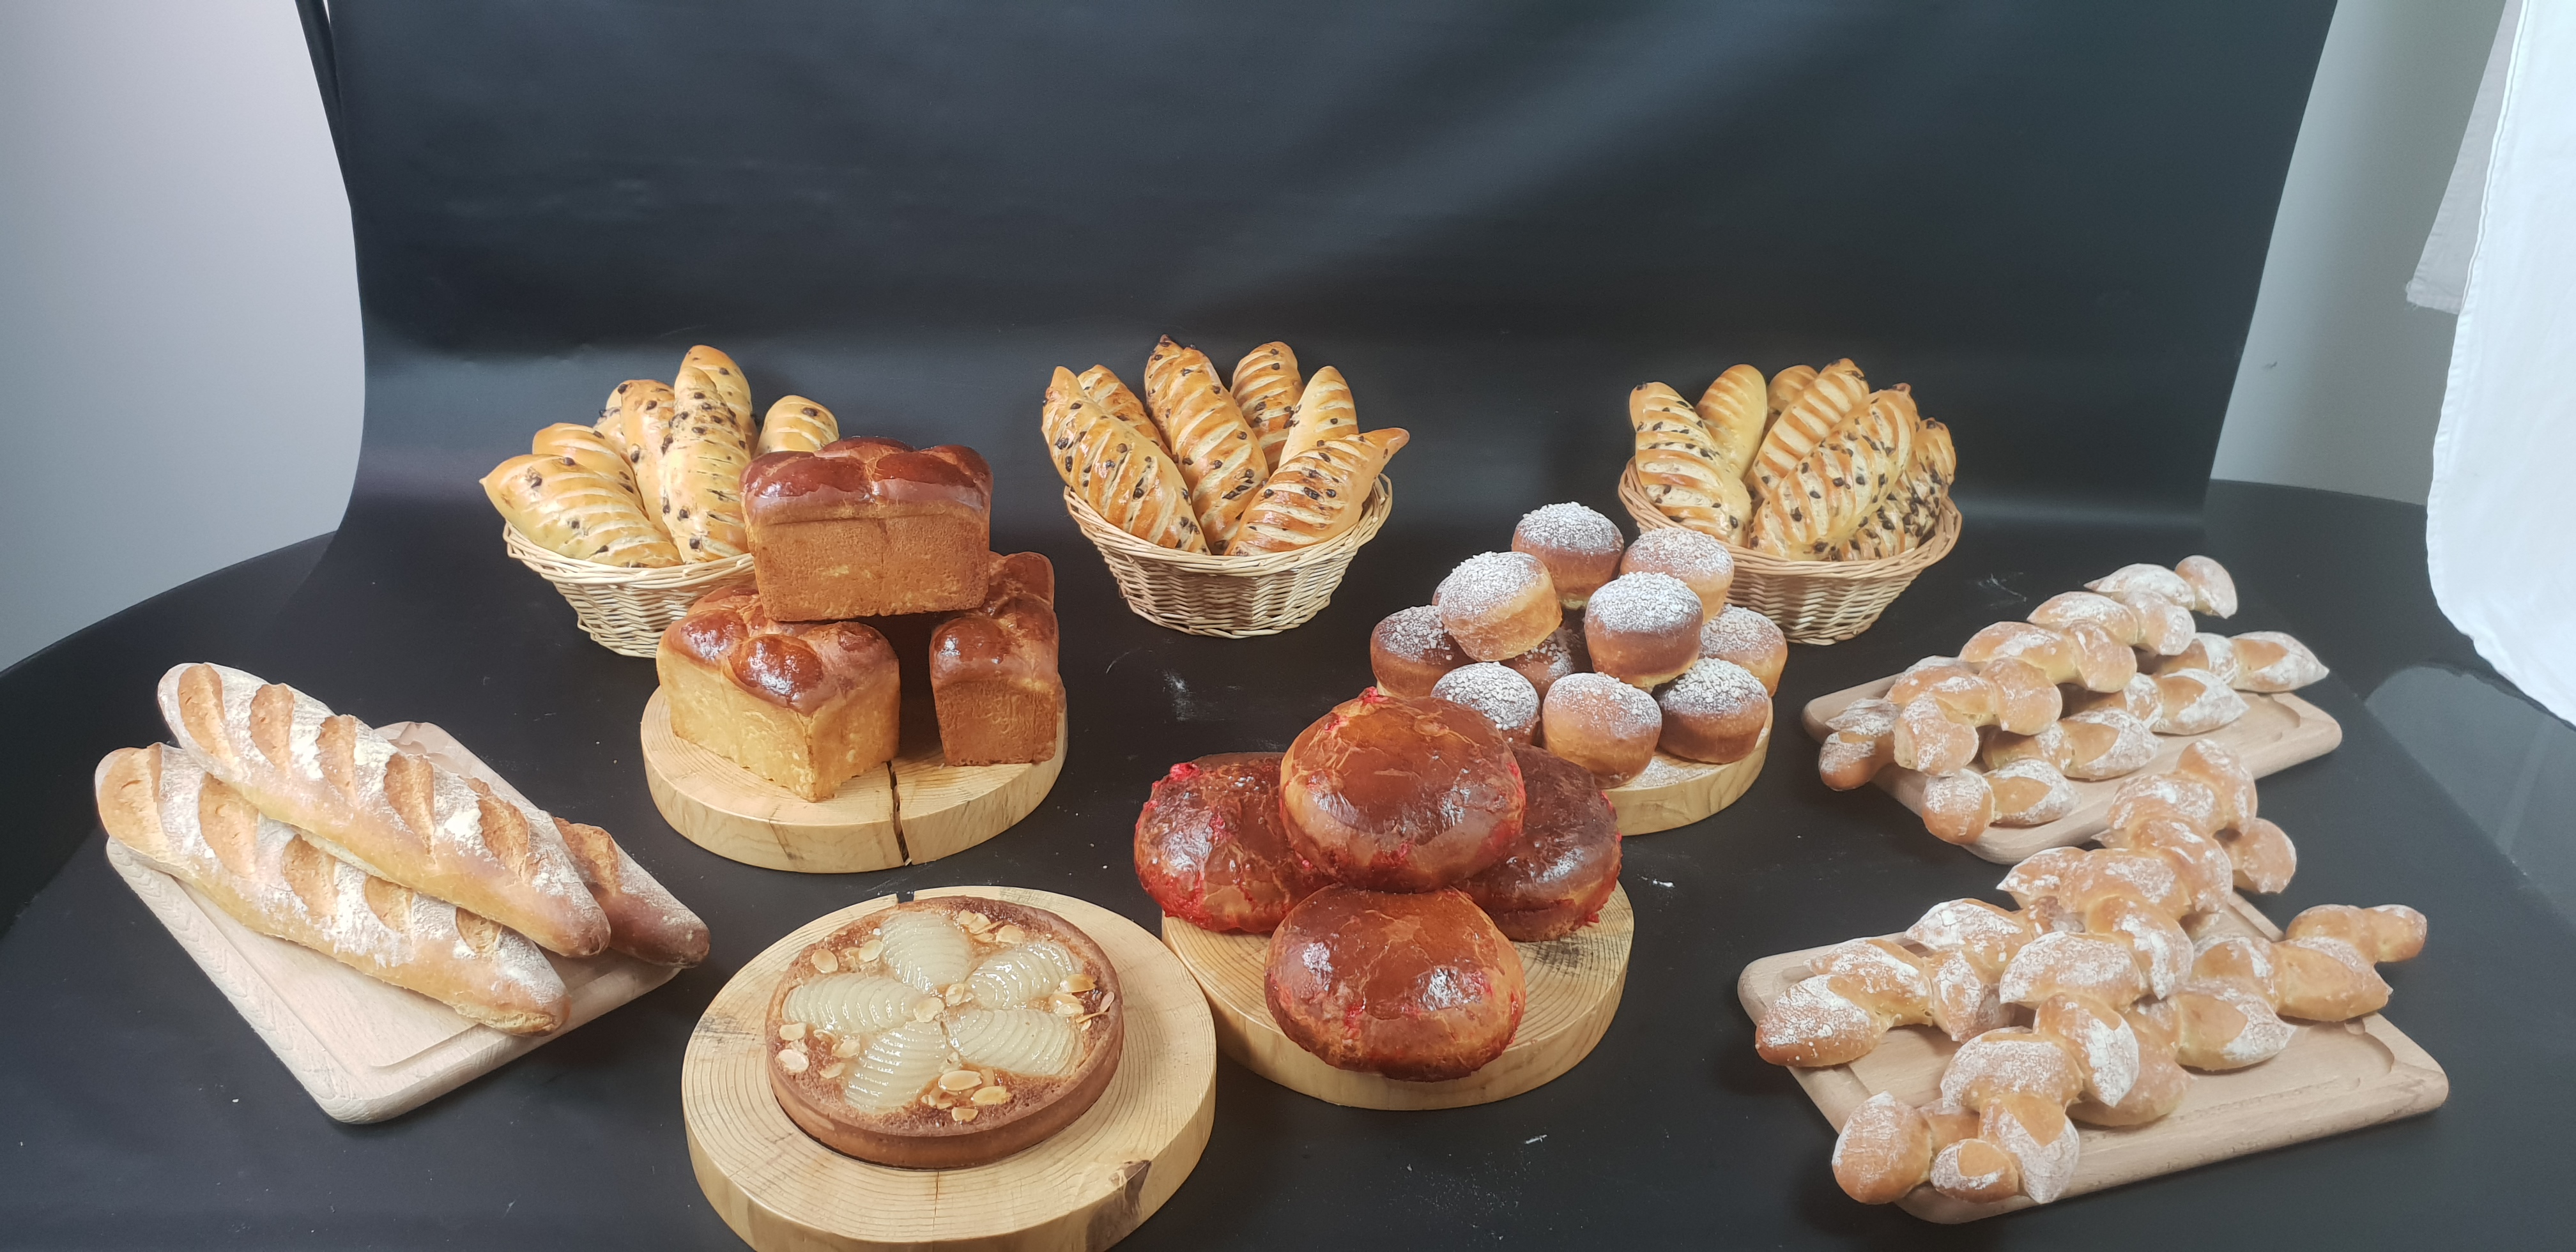 Breads baked by students